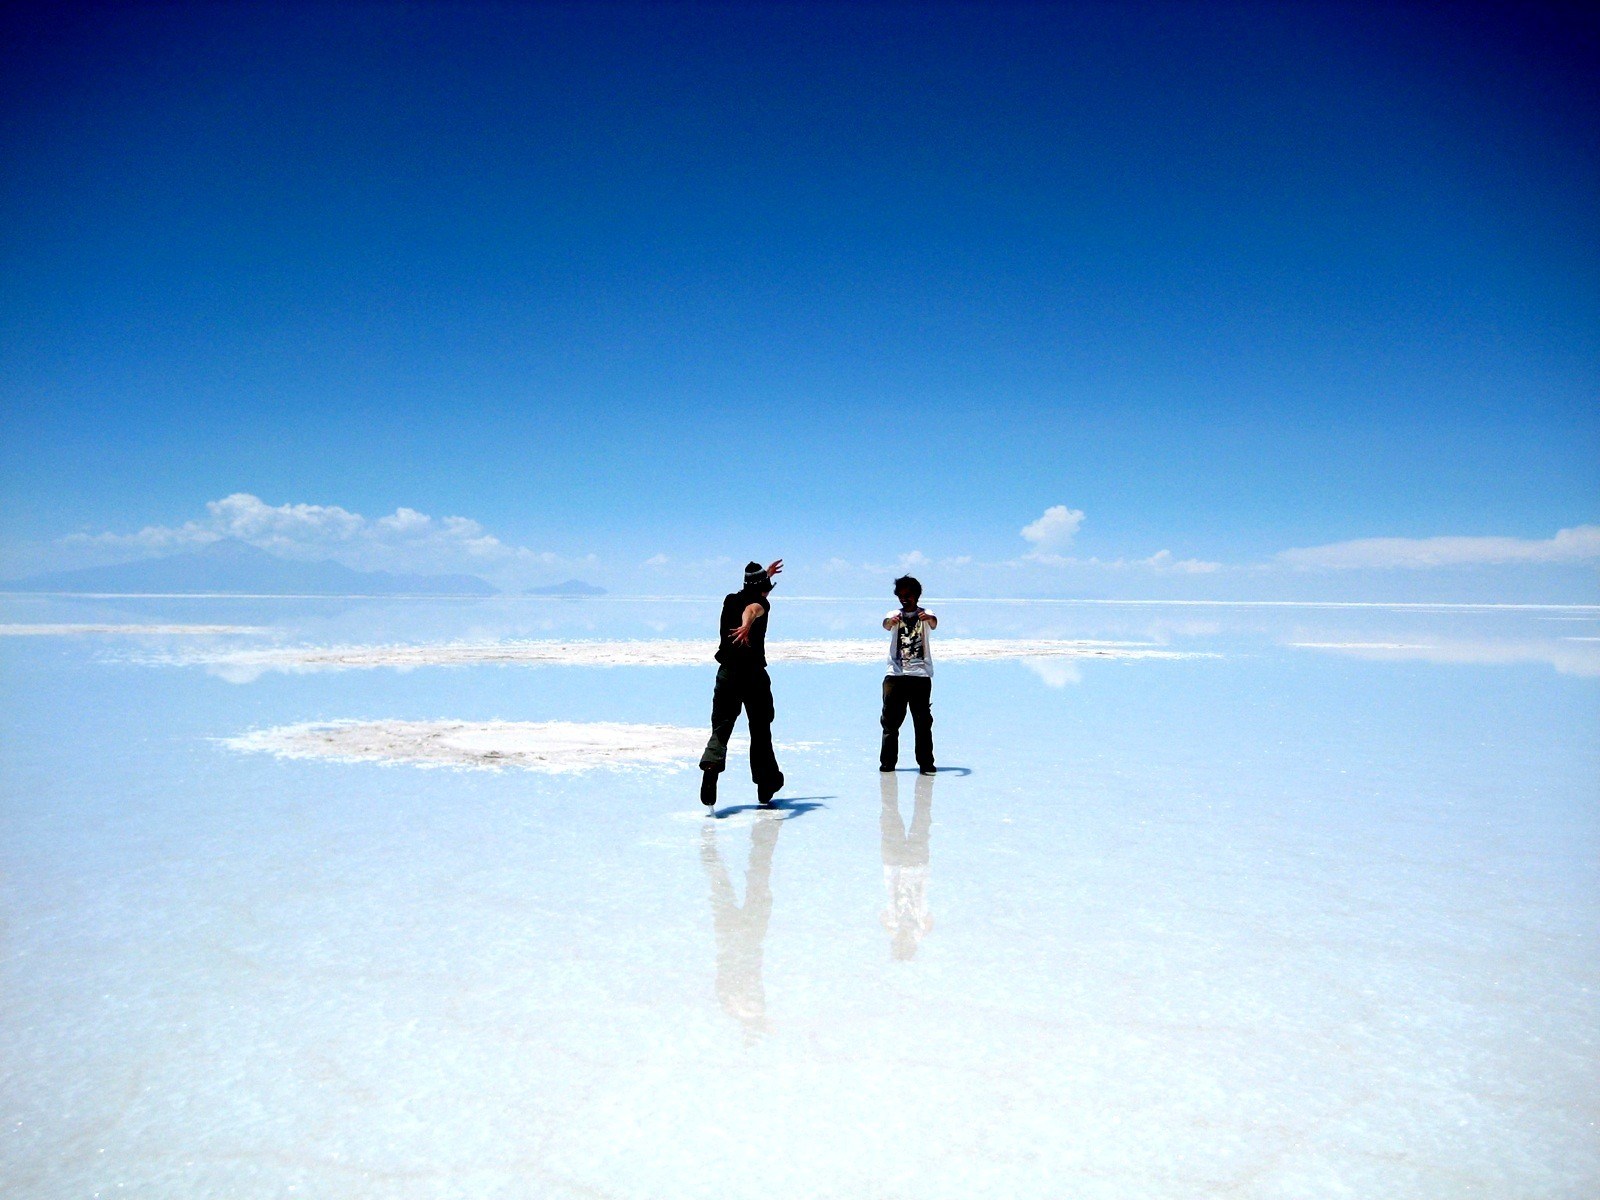 Salar de Uyuni Bolivia Top 10 Most Beautiful Places in the World to Visit - 4